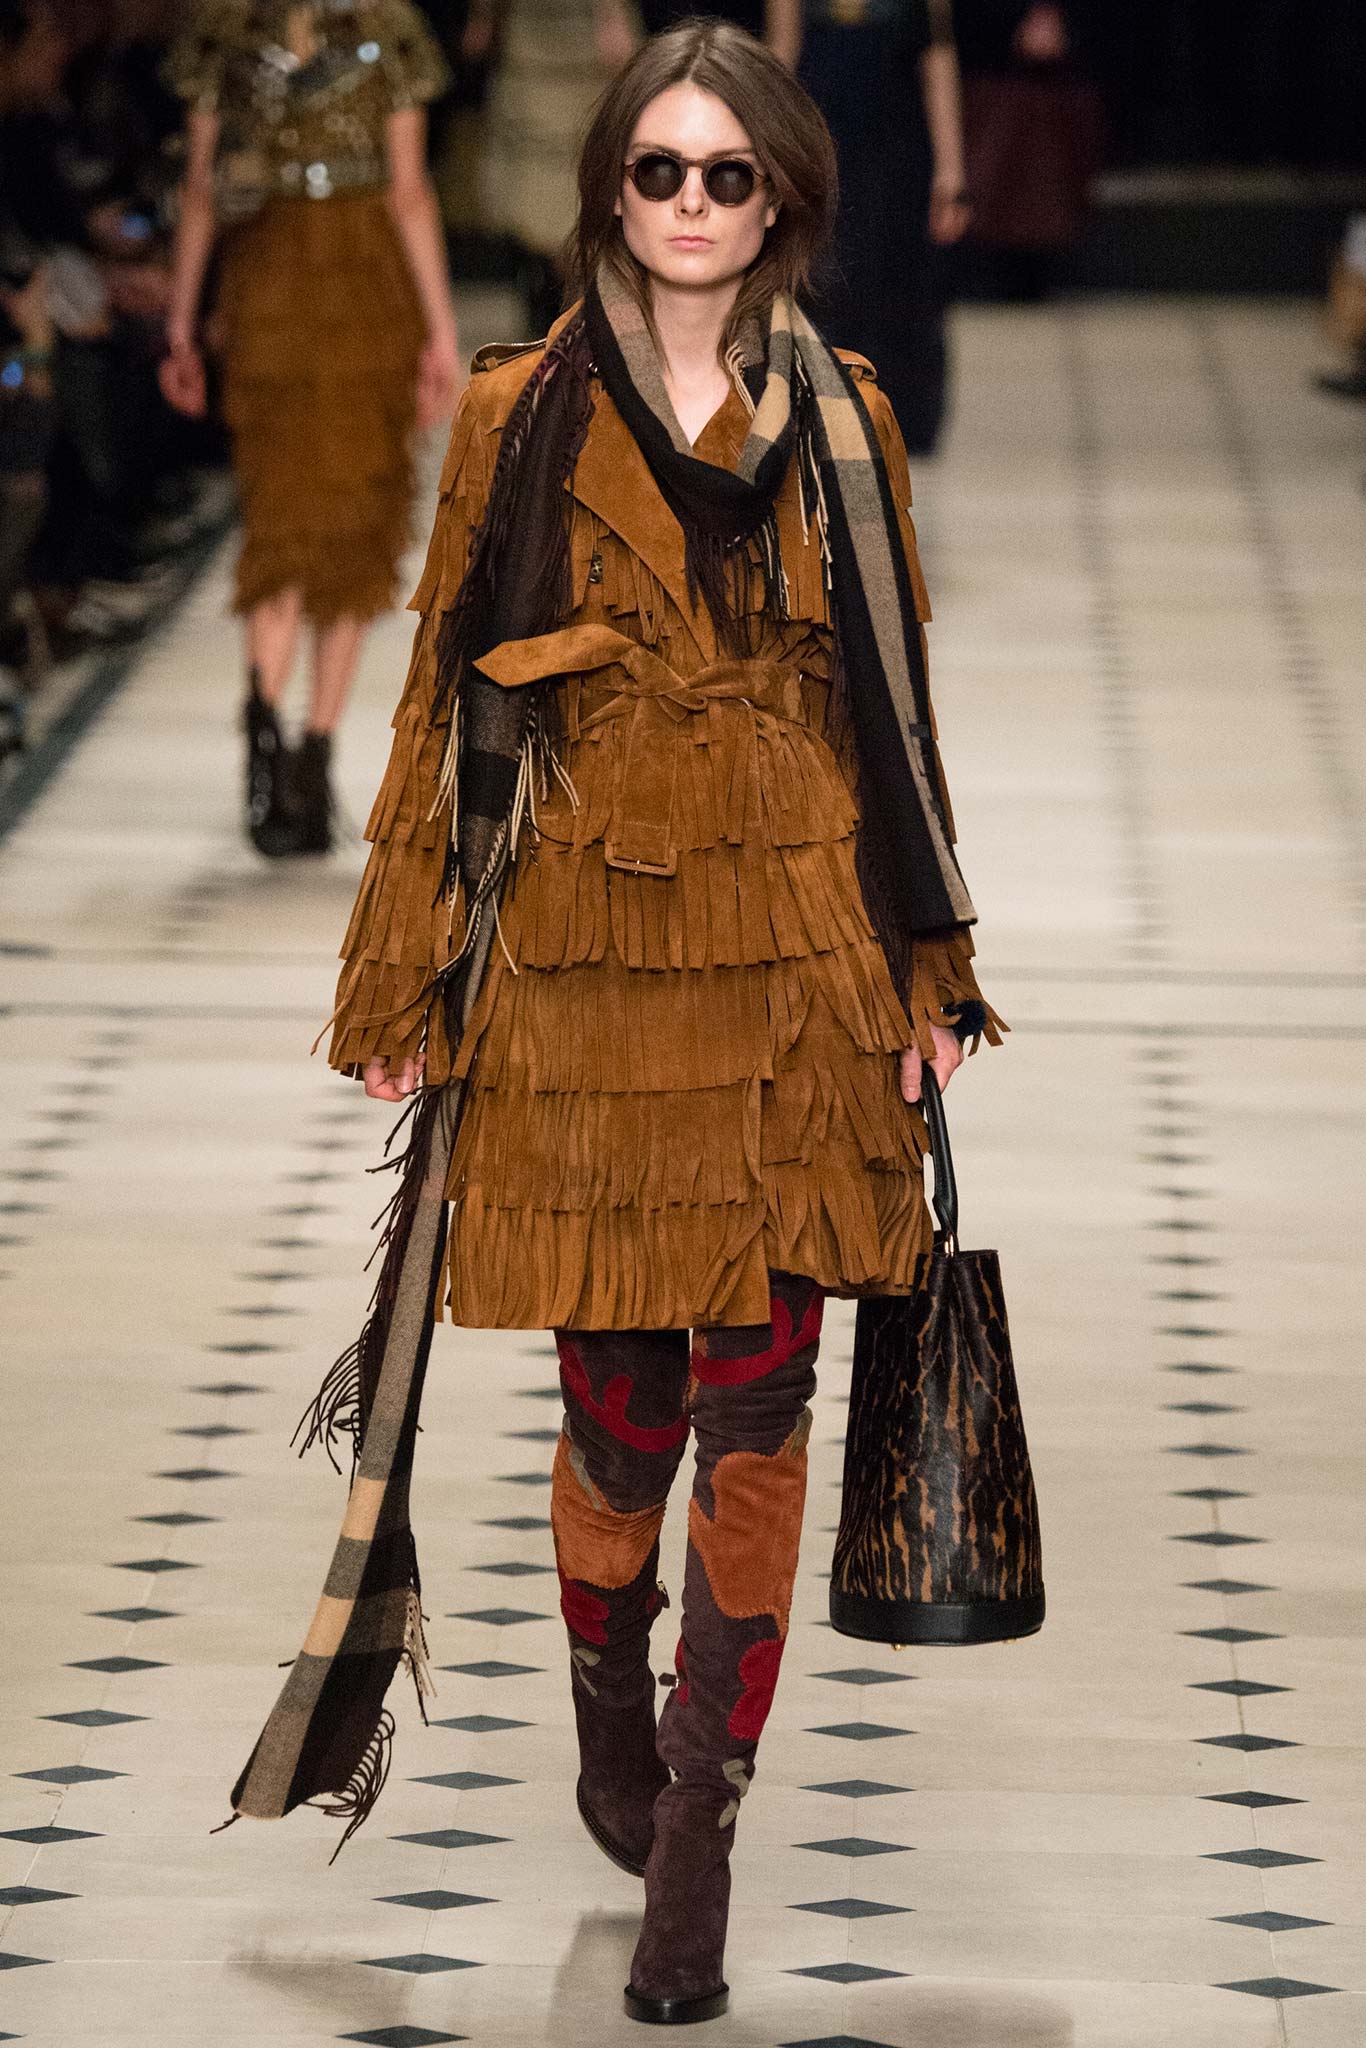 LFW Lessons: Wear Fringe Without Looking Like A Cowboy